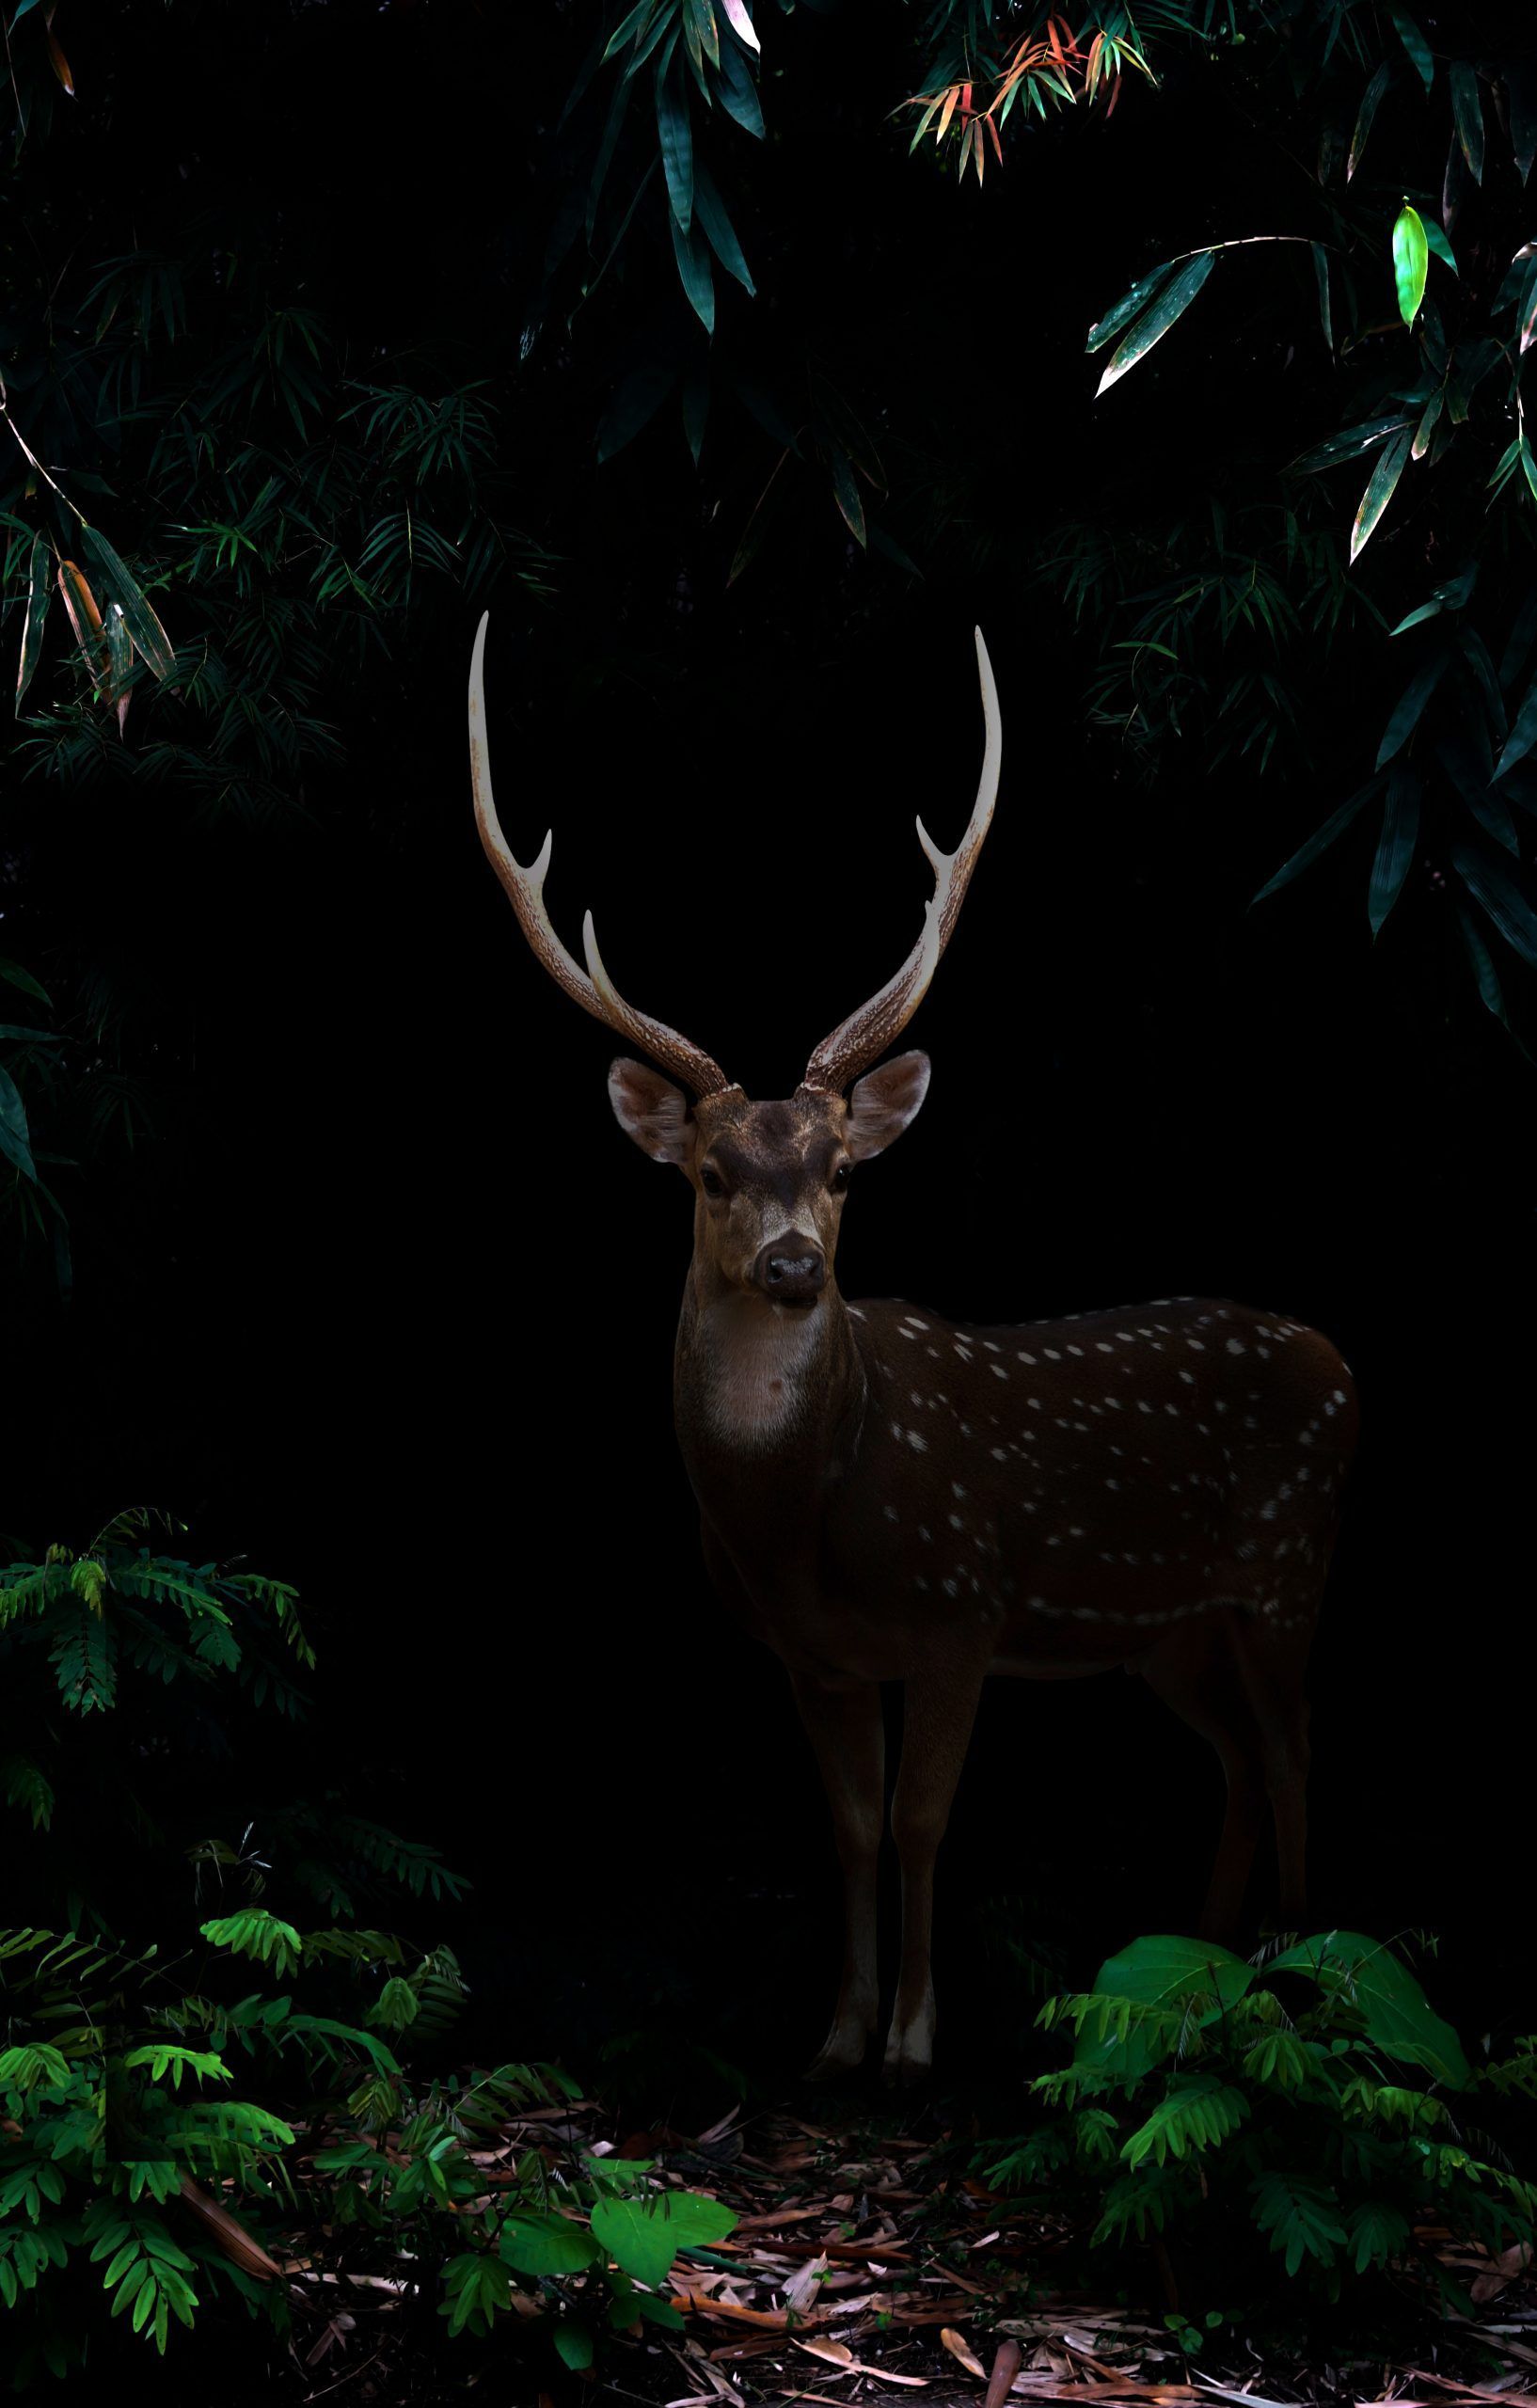 A deer with antlers standing in the forest - Deer